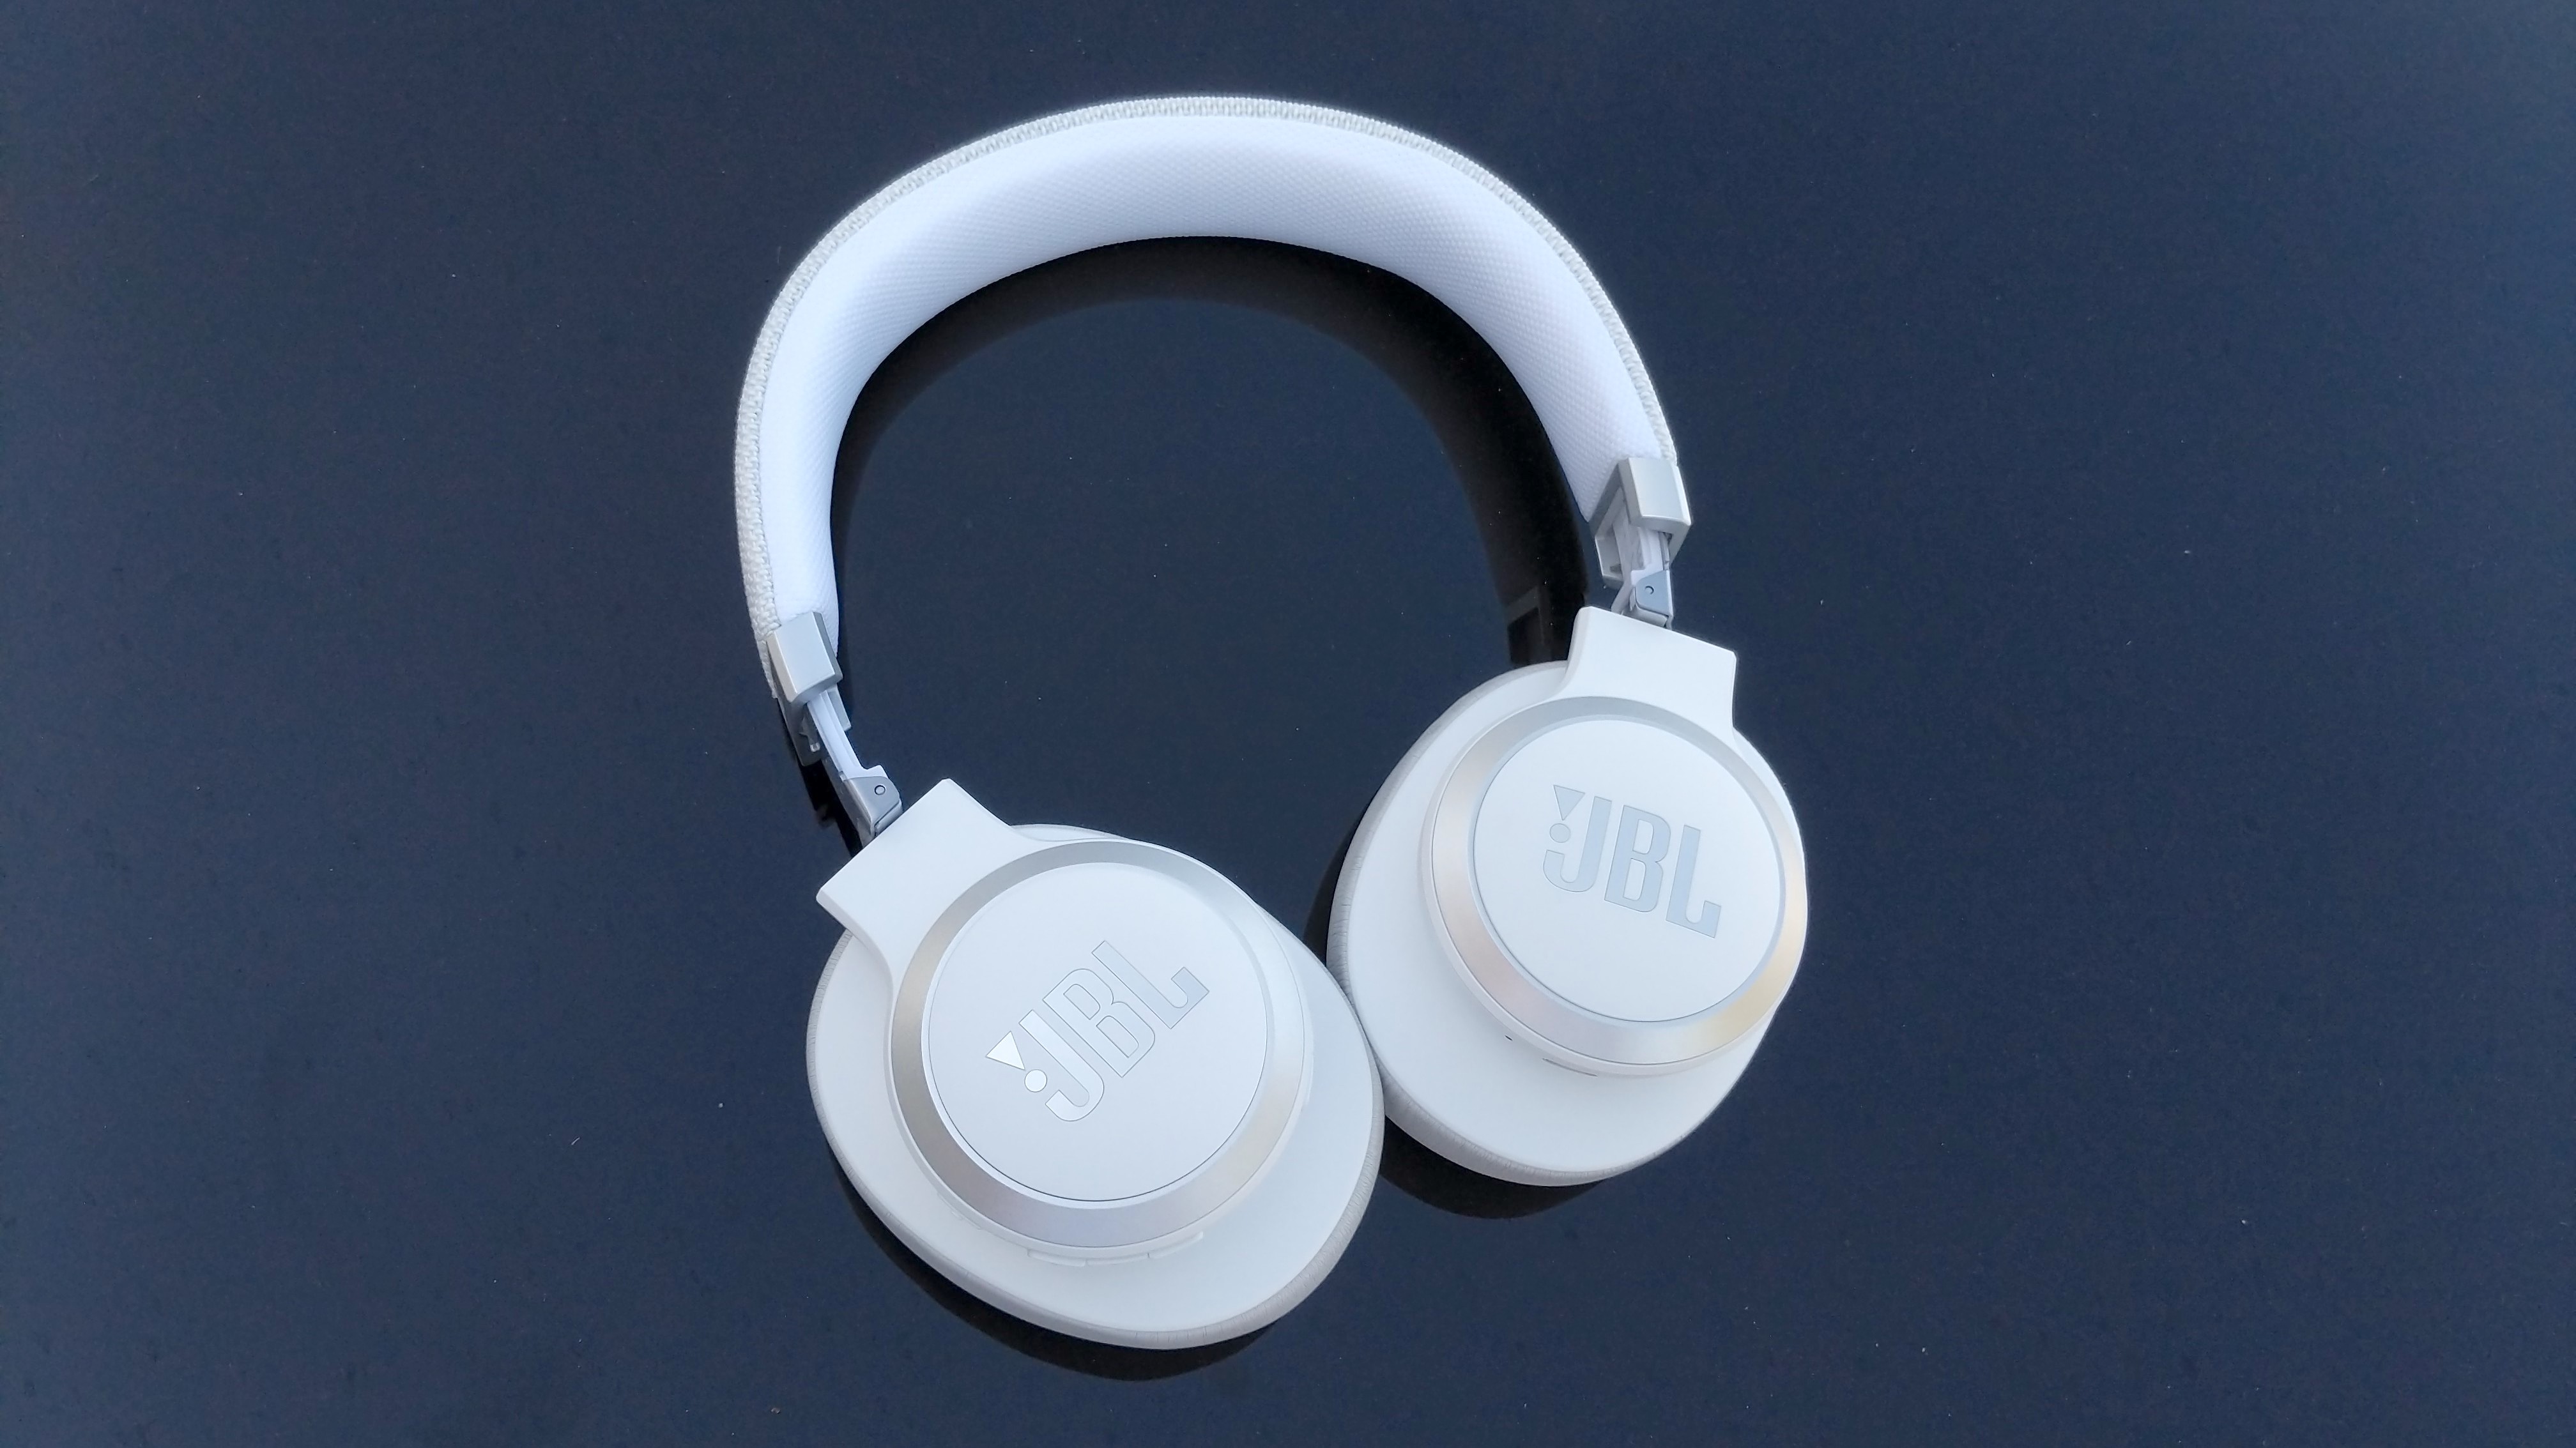 JBL Live 660NC Wireless Headphones, Active Noise Cancelling